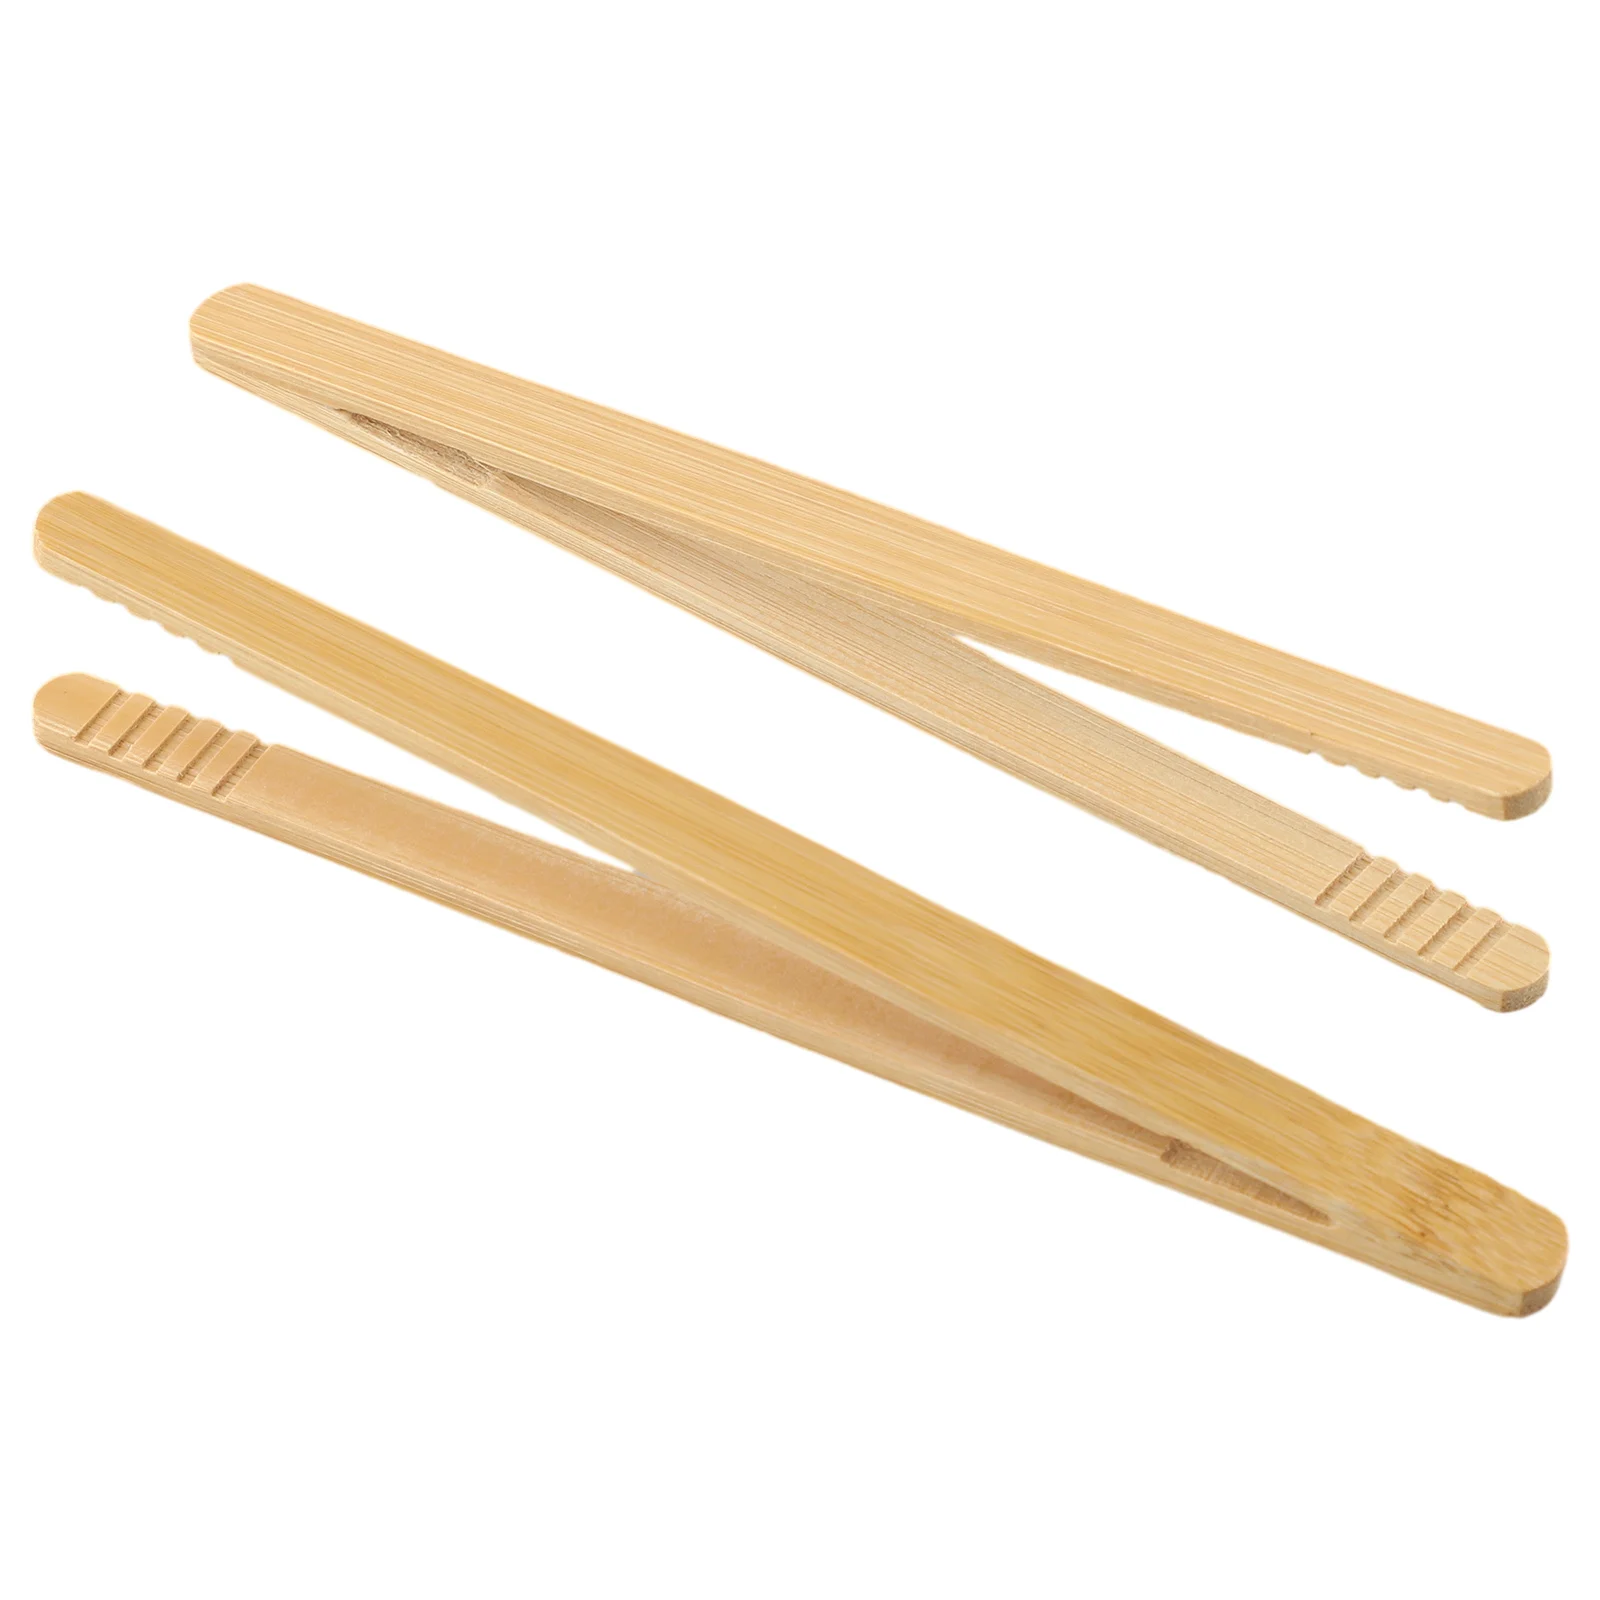 

Durable High Quality Bamboo Tea Holder Clip Tongs Universal Portable Practical Approx. 18cm Calmp For Breakfast